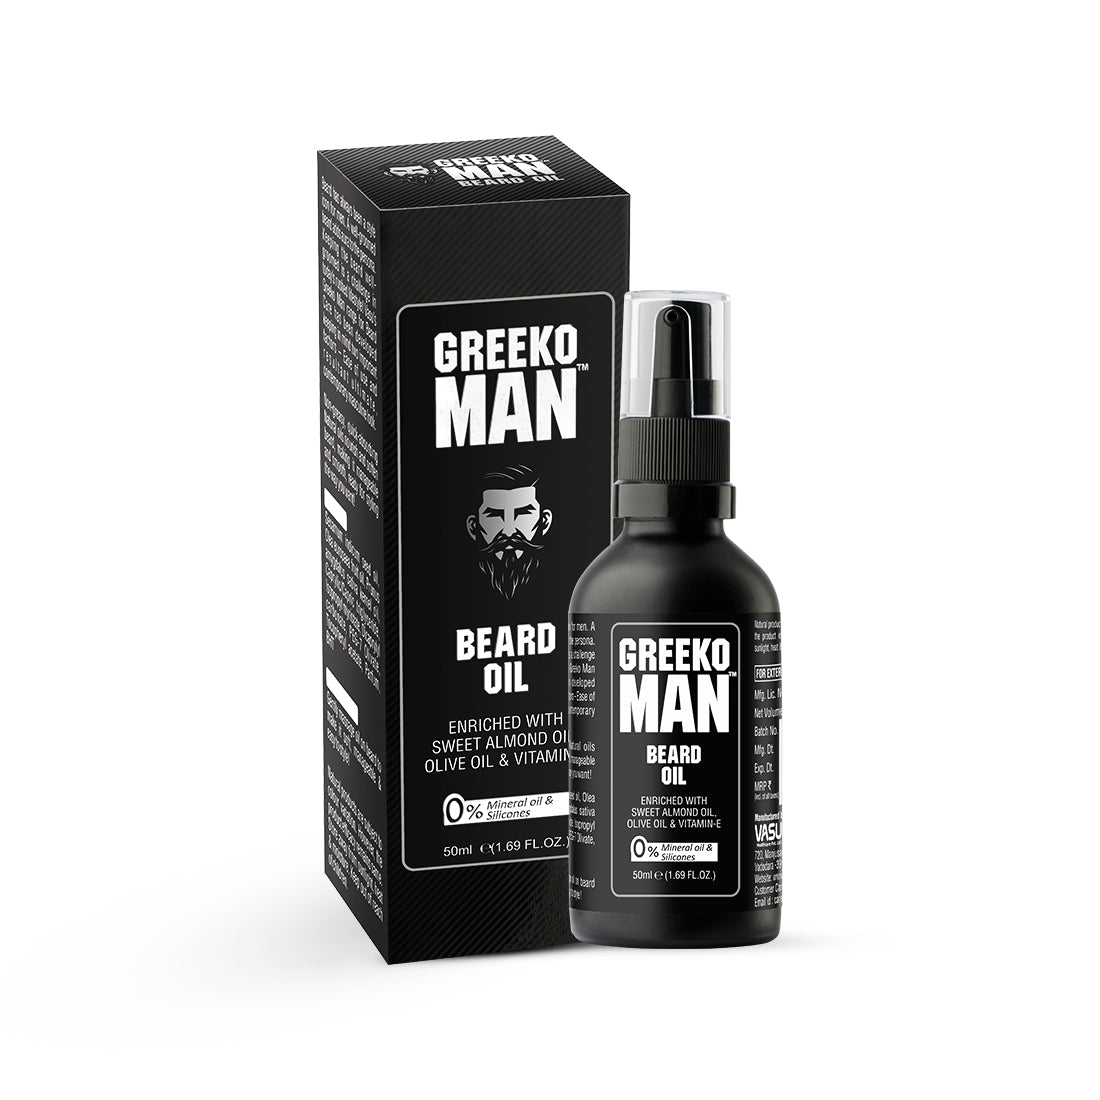 Greeko Man Beard Oil - Enriched with Almond Oil, Olive Oil & Vitamin E - It Nourishes & Softens beard and Making It Manageable - Promotes Healthy Beard Growth - VasuStore